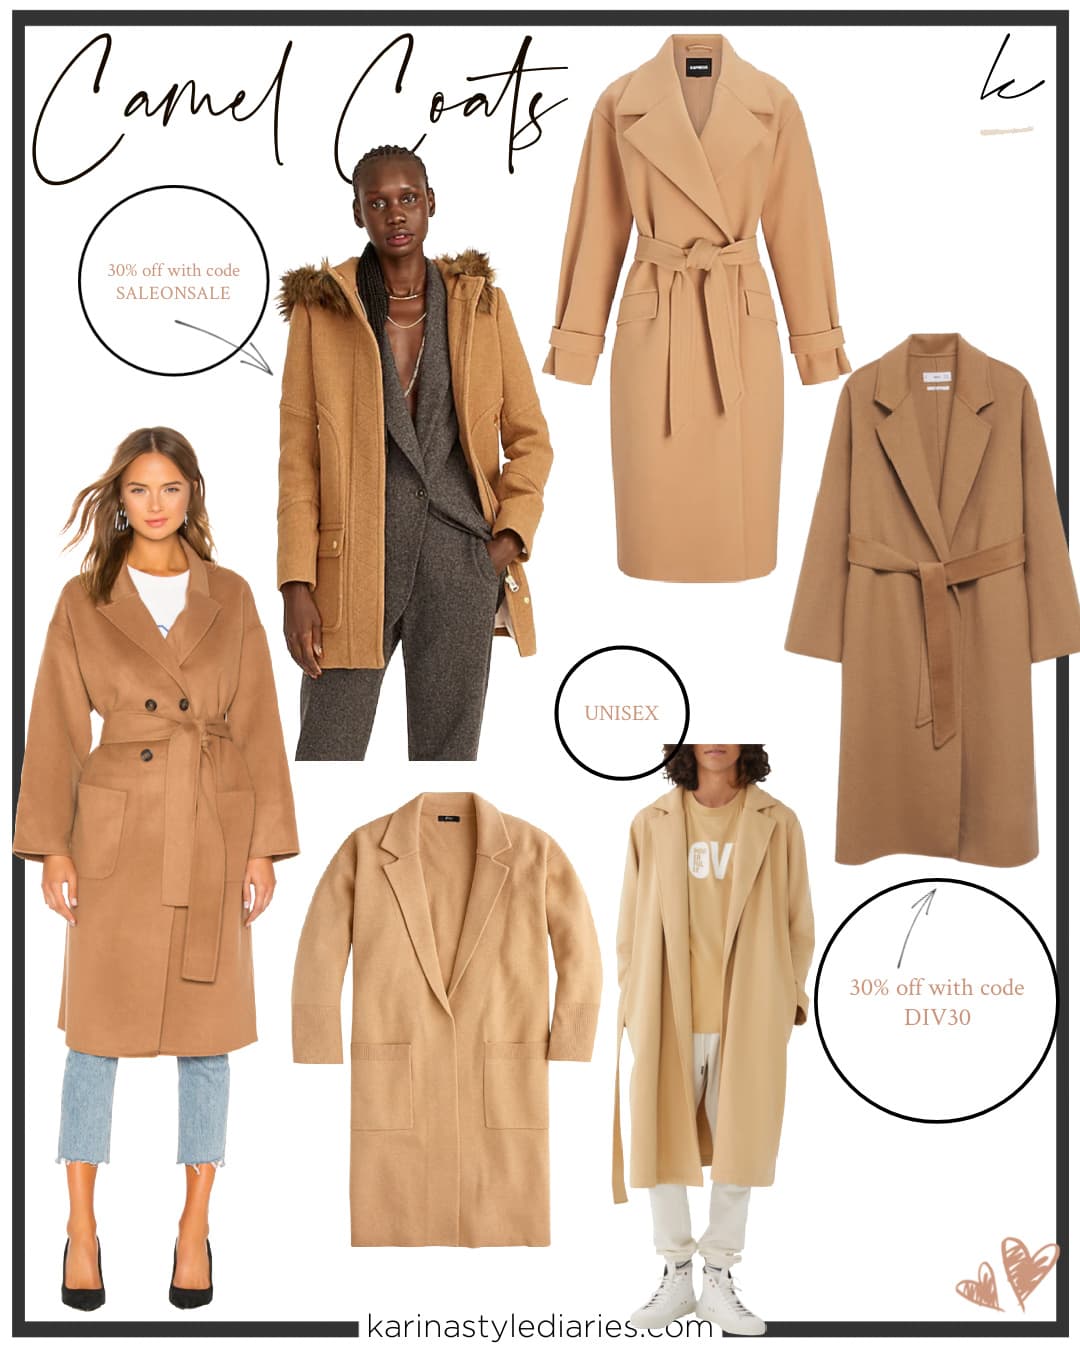 Weekly Outfit Round-Up Vol. 25 + Camel Coat Options - Karina Style Diaries